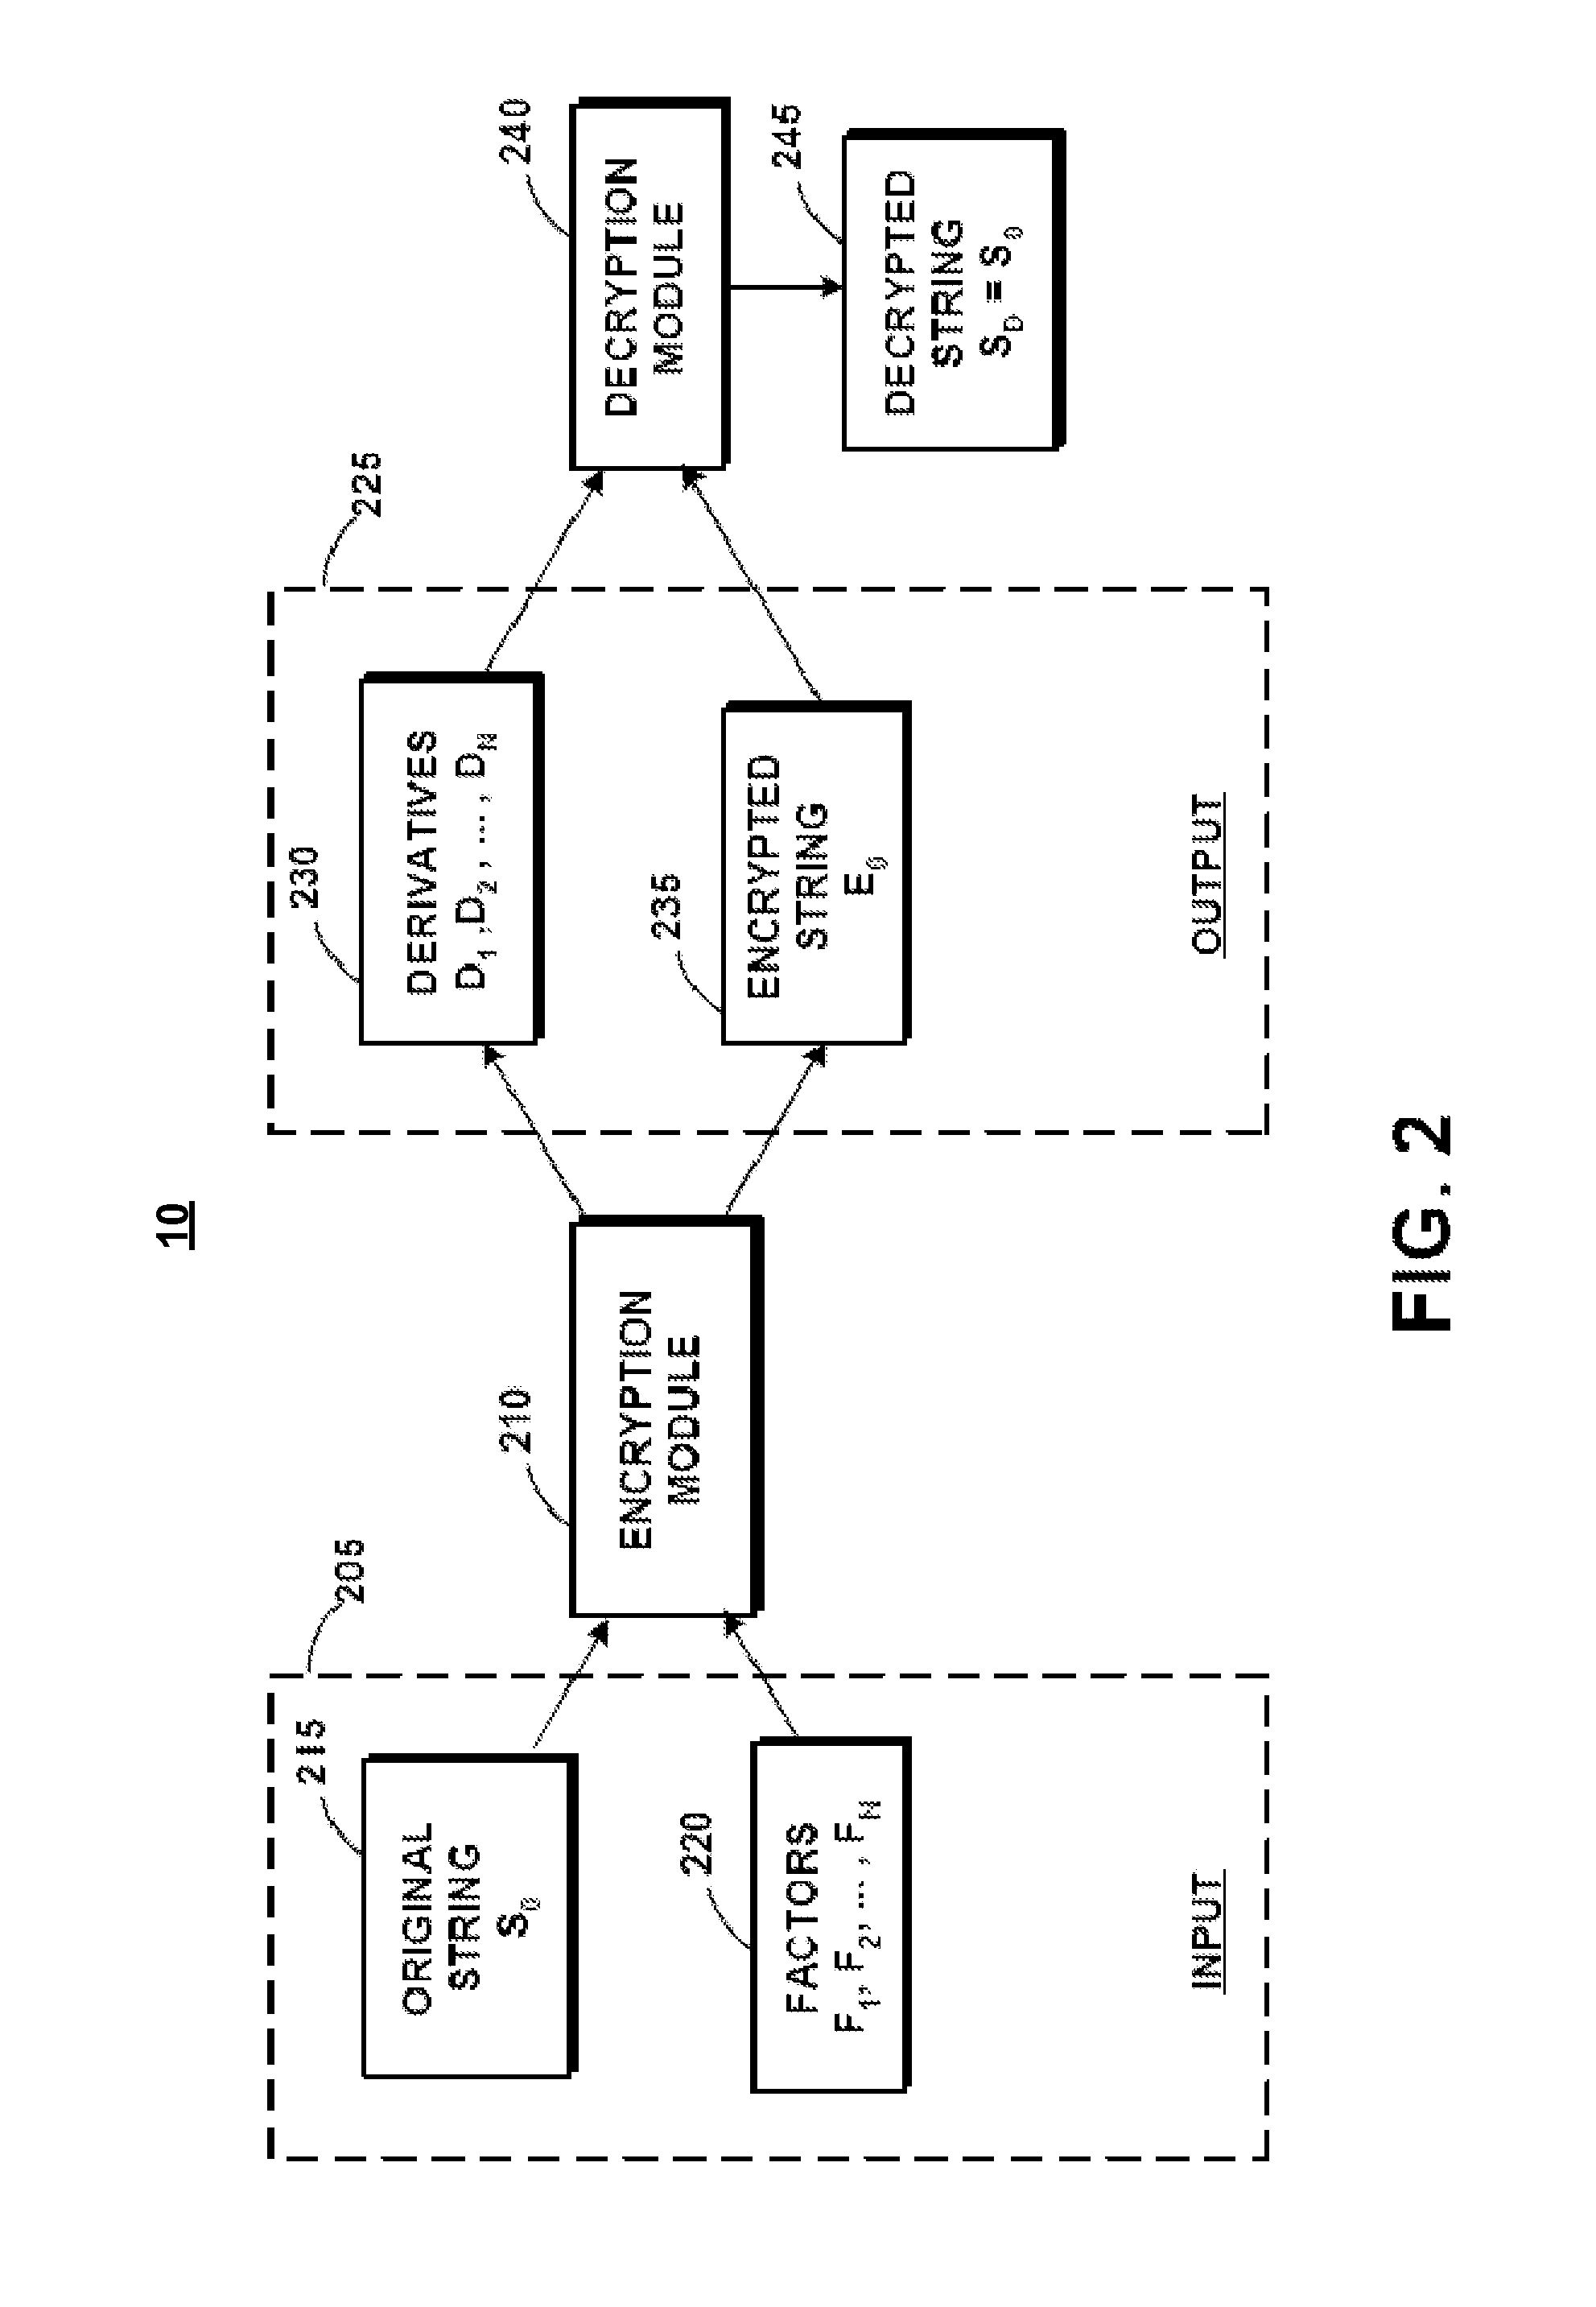 Method for encrypting and decrypting data using derivative equations and factors